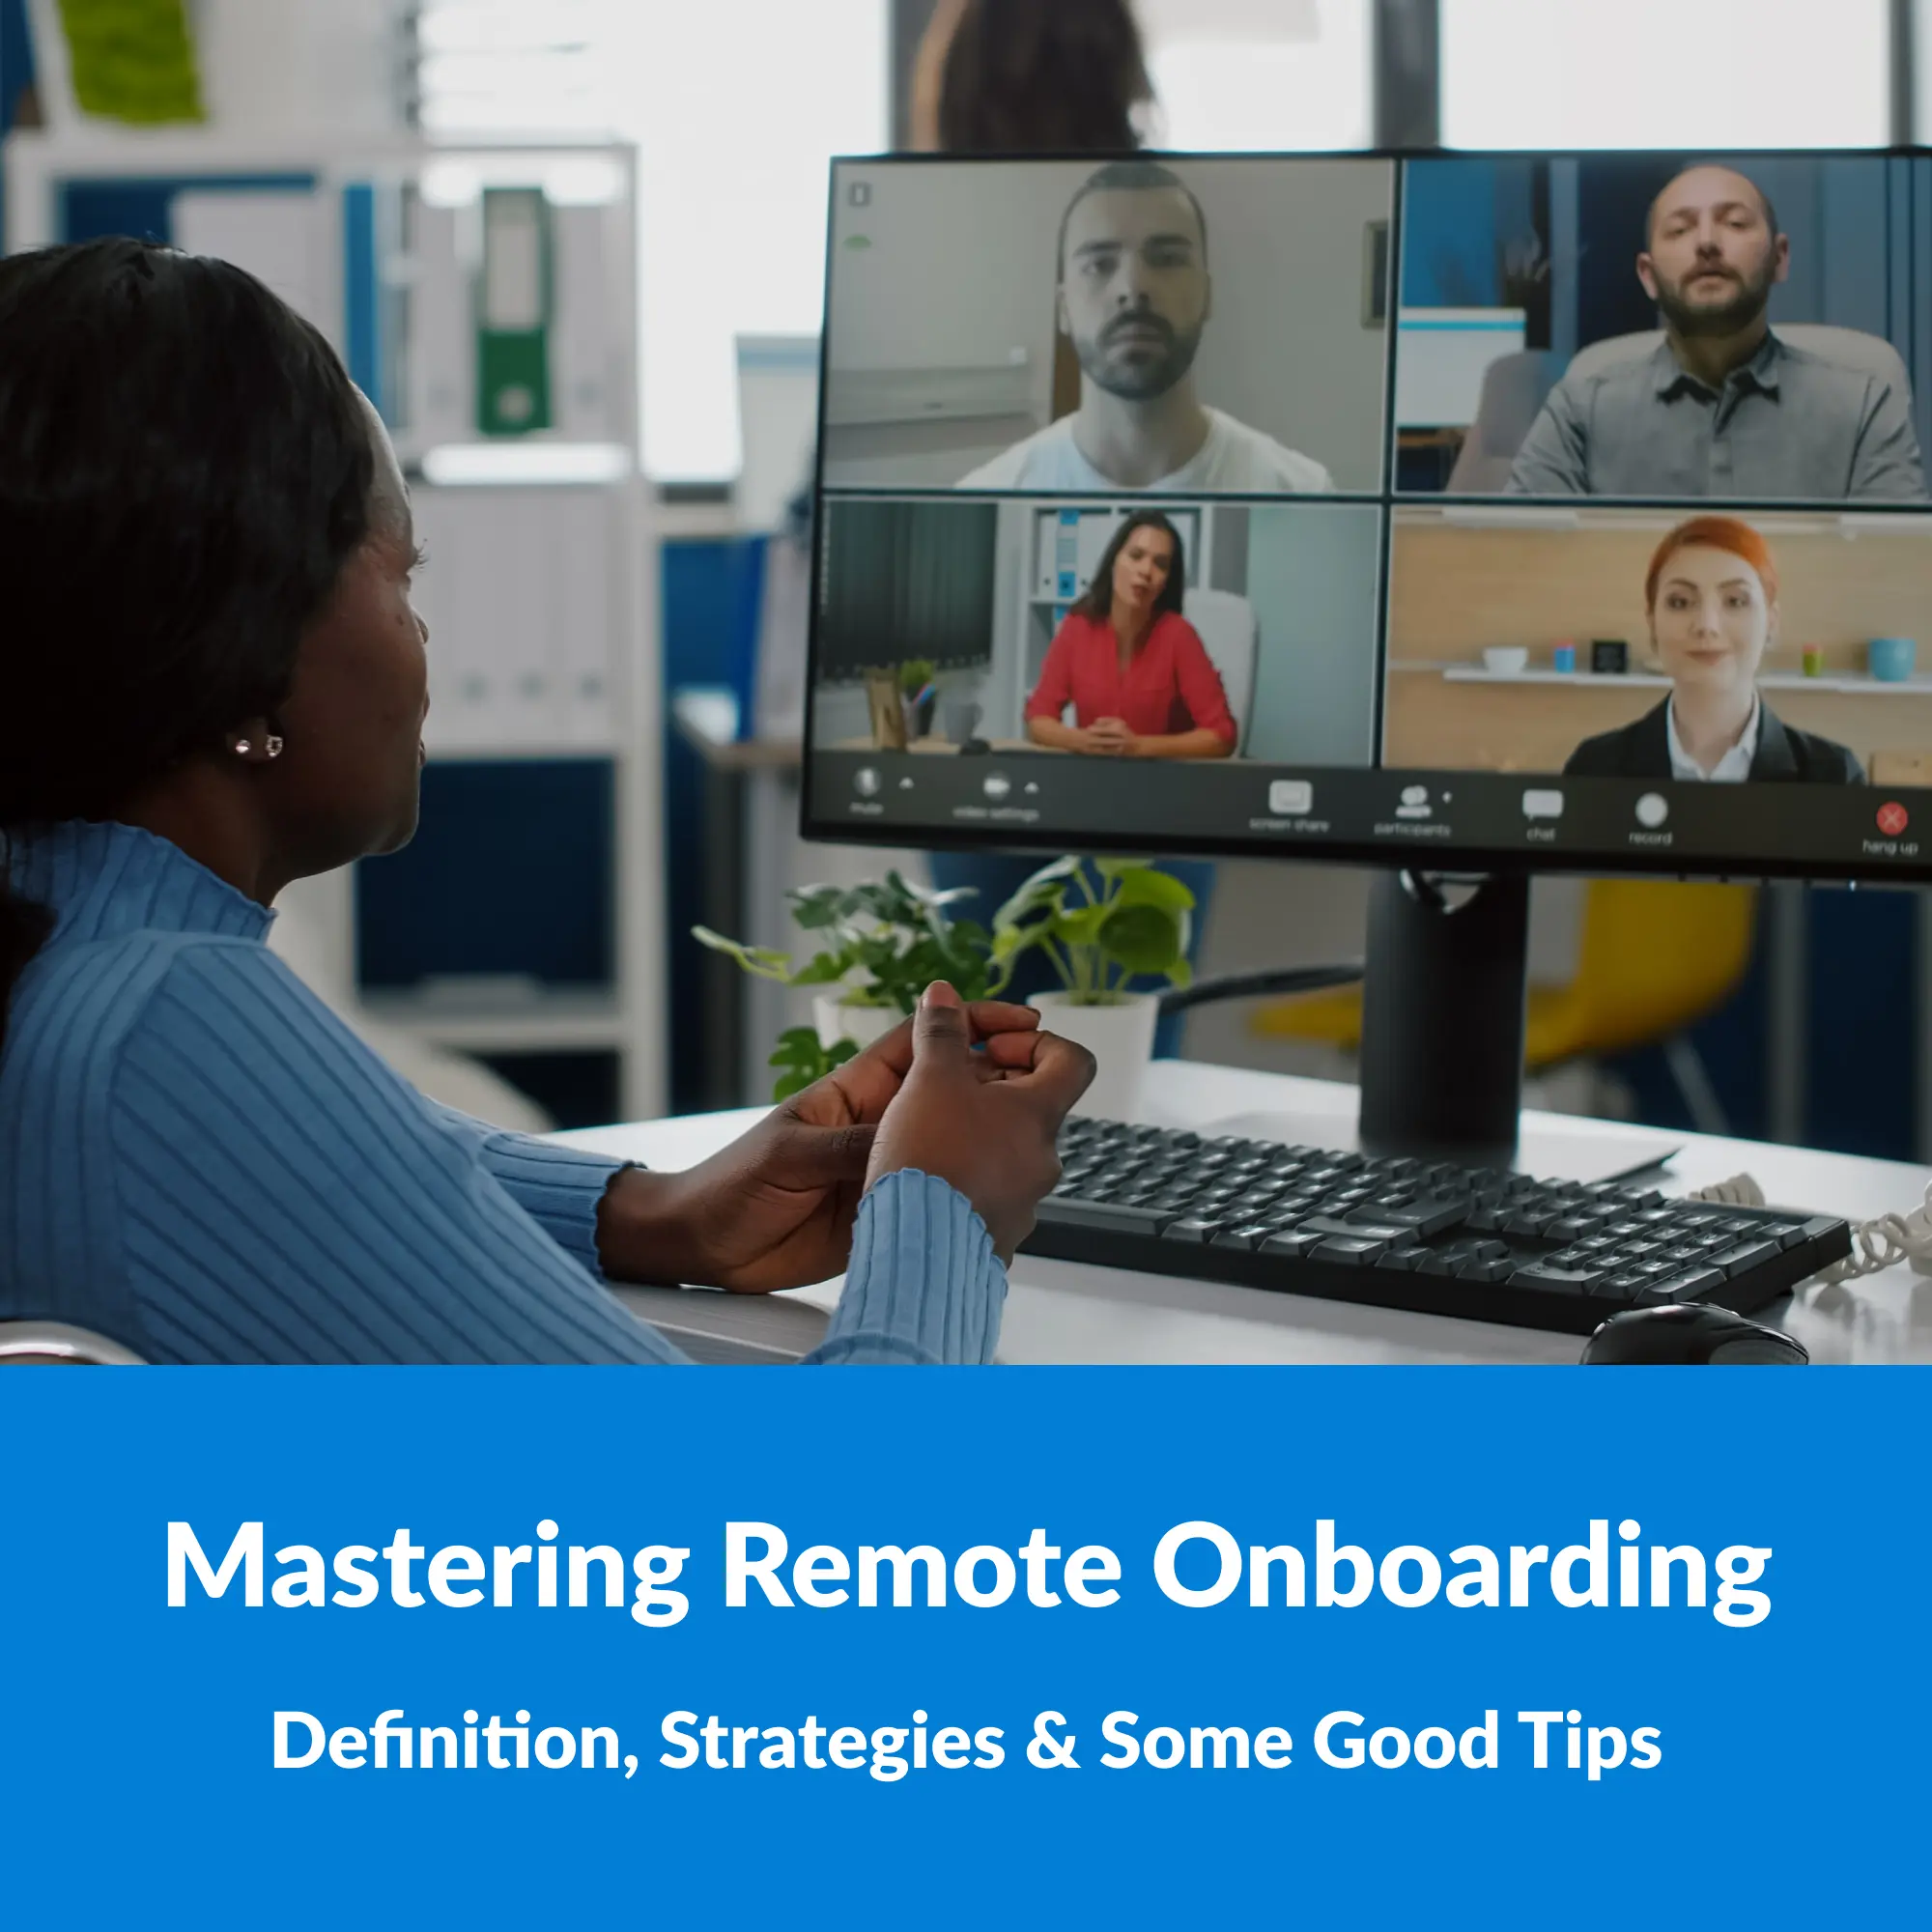 Mastering Remote Onboarding